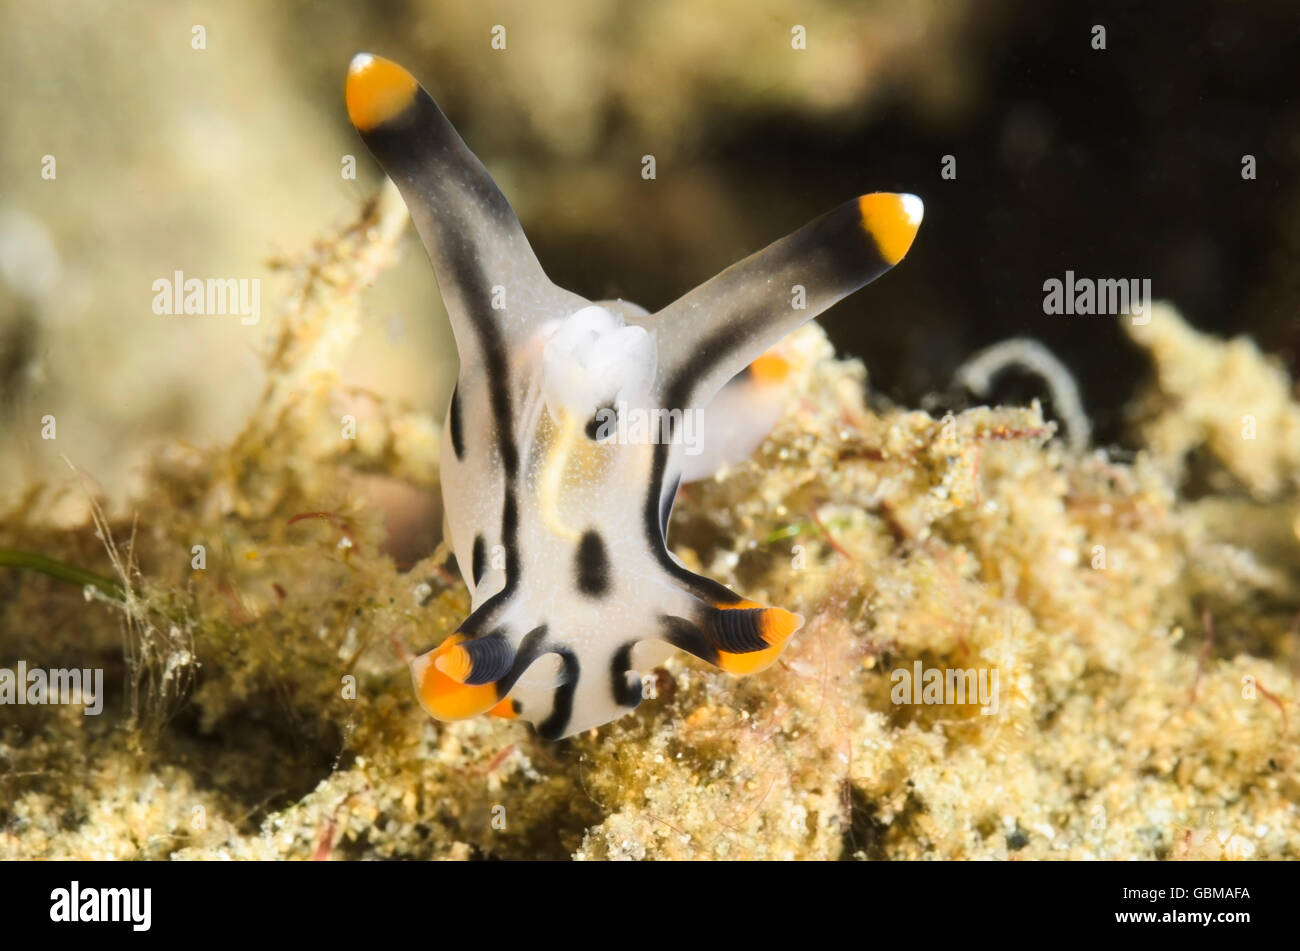 sea slug or nudibranch, Thecacera picta, with copepod parasite. The egg case of the copepod can be seen in the gills Stock Photo